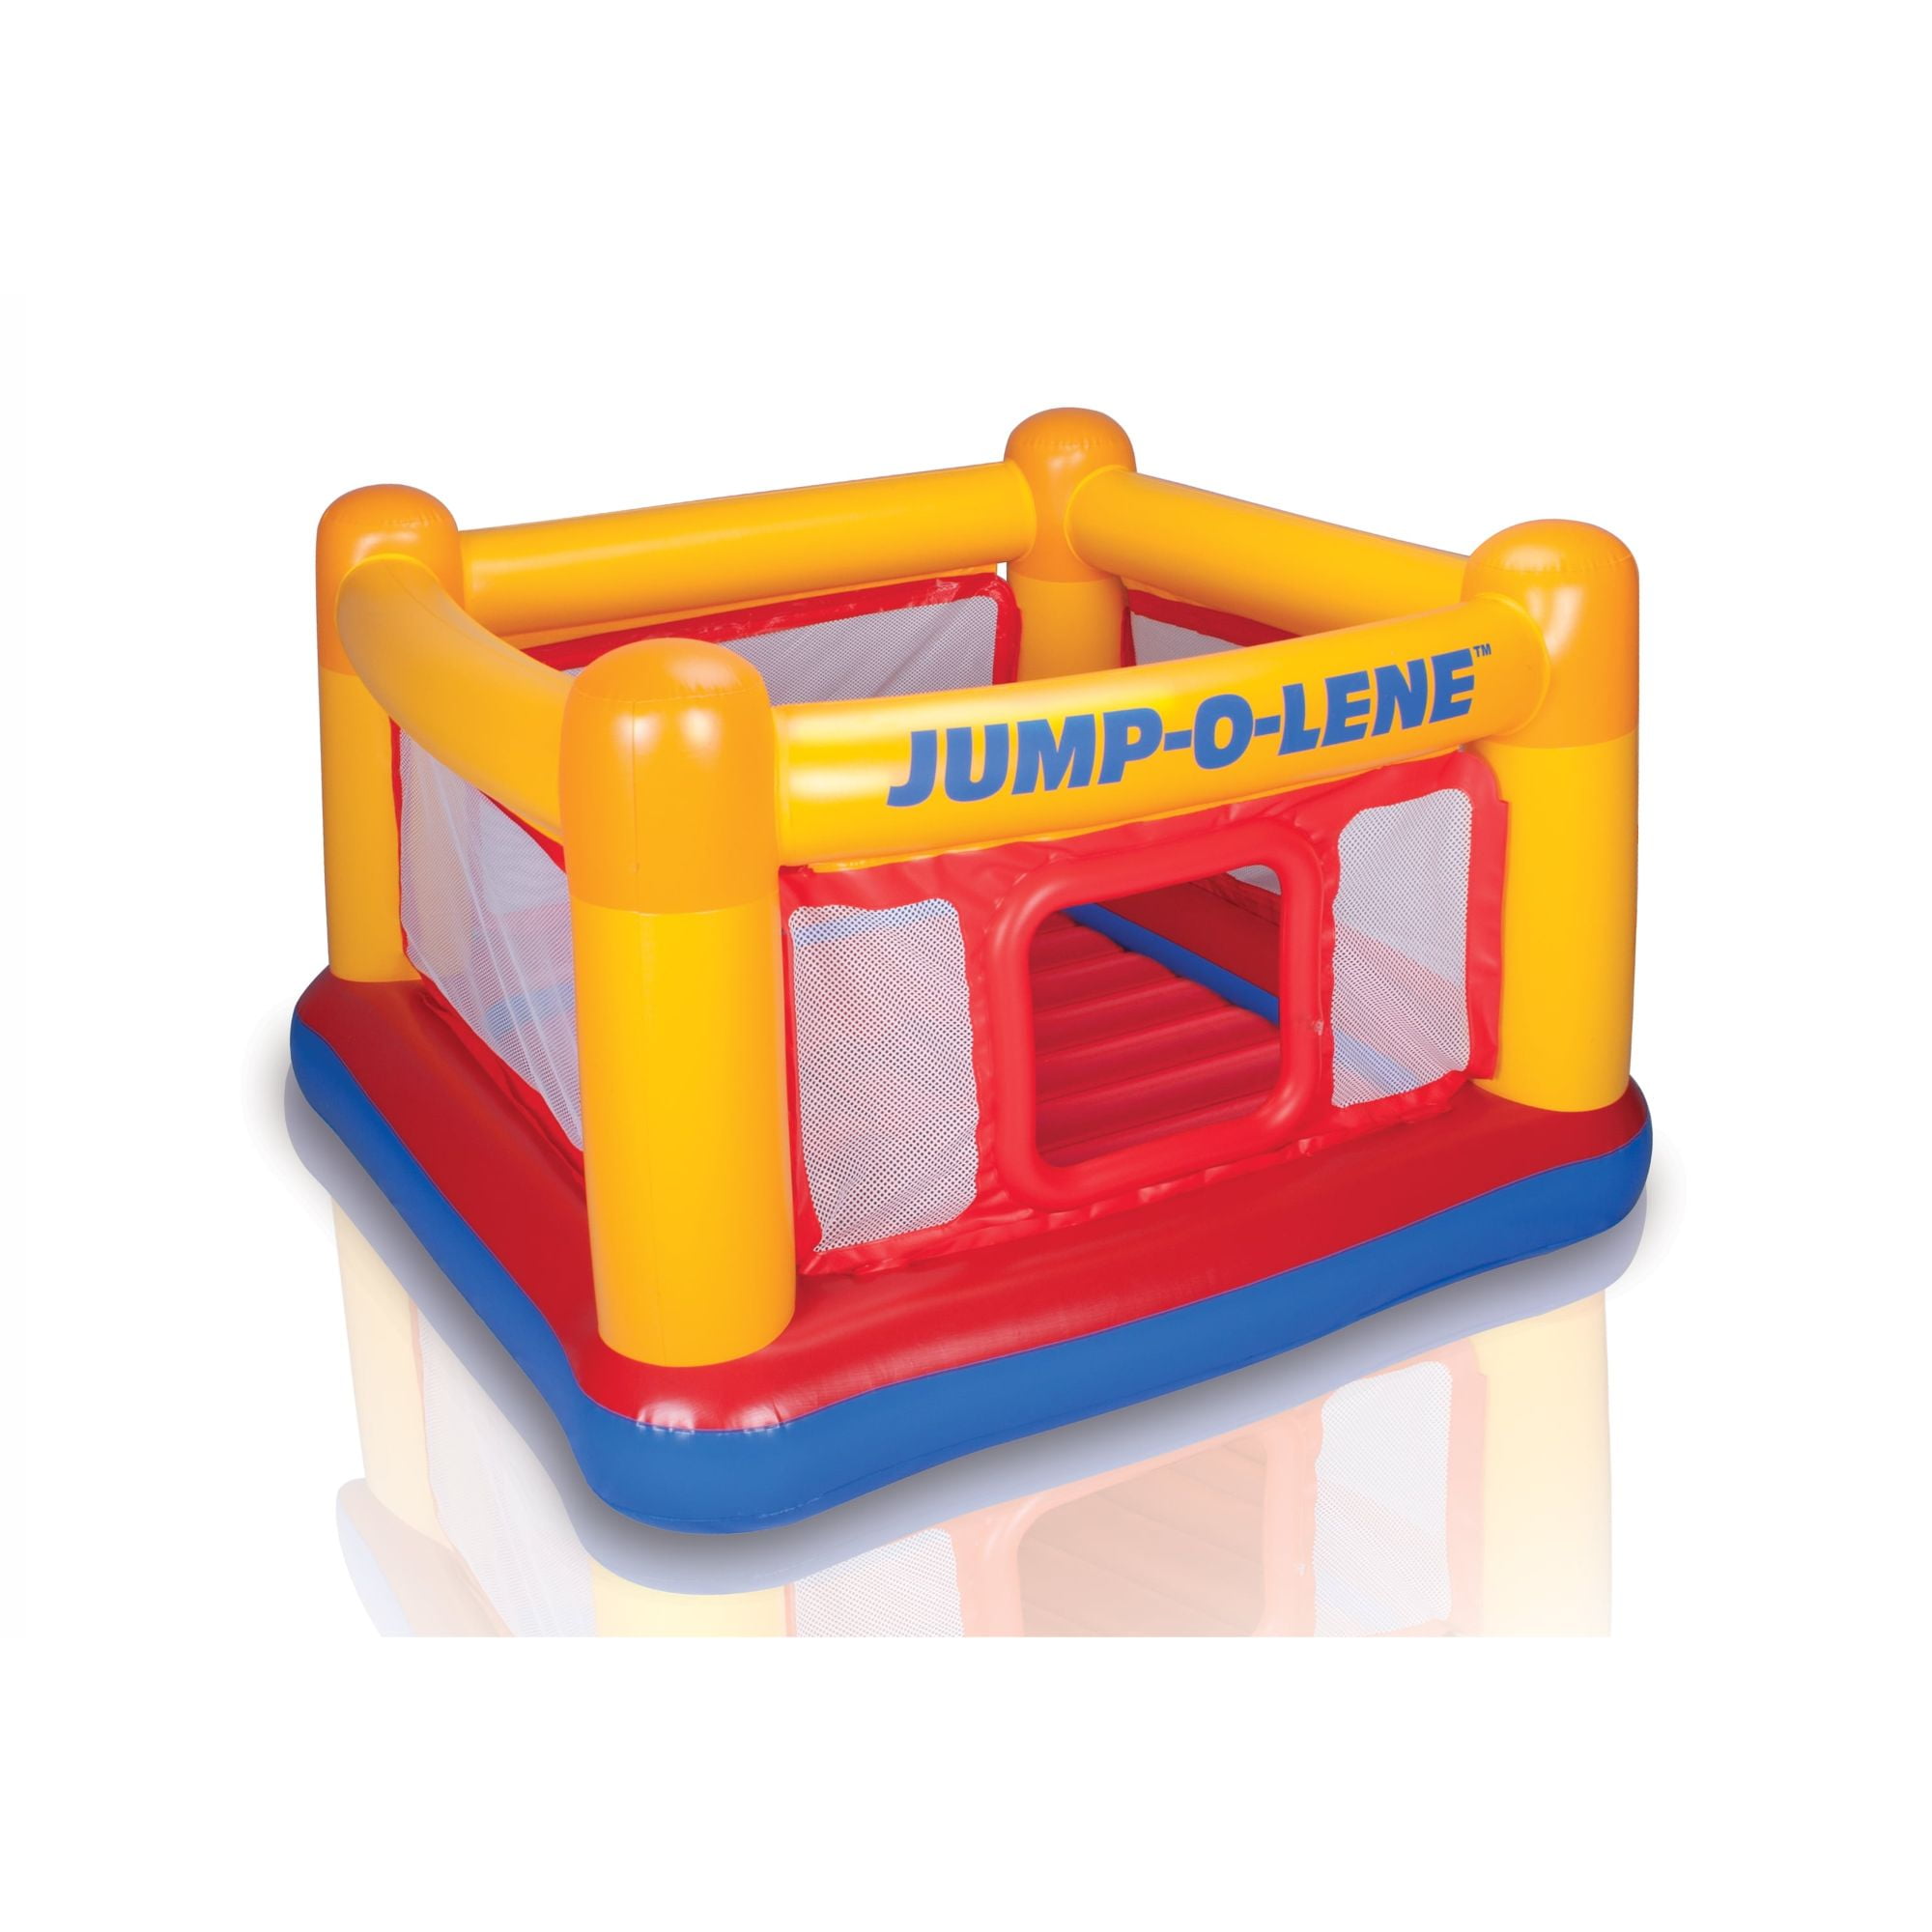 Uk Stock Intex Jump-O-Lene Bouncy Castle Bouncer New UPS Next Day Delivery 